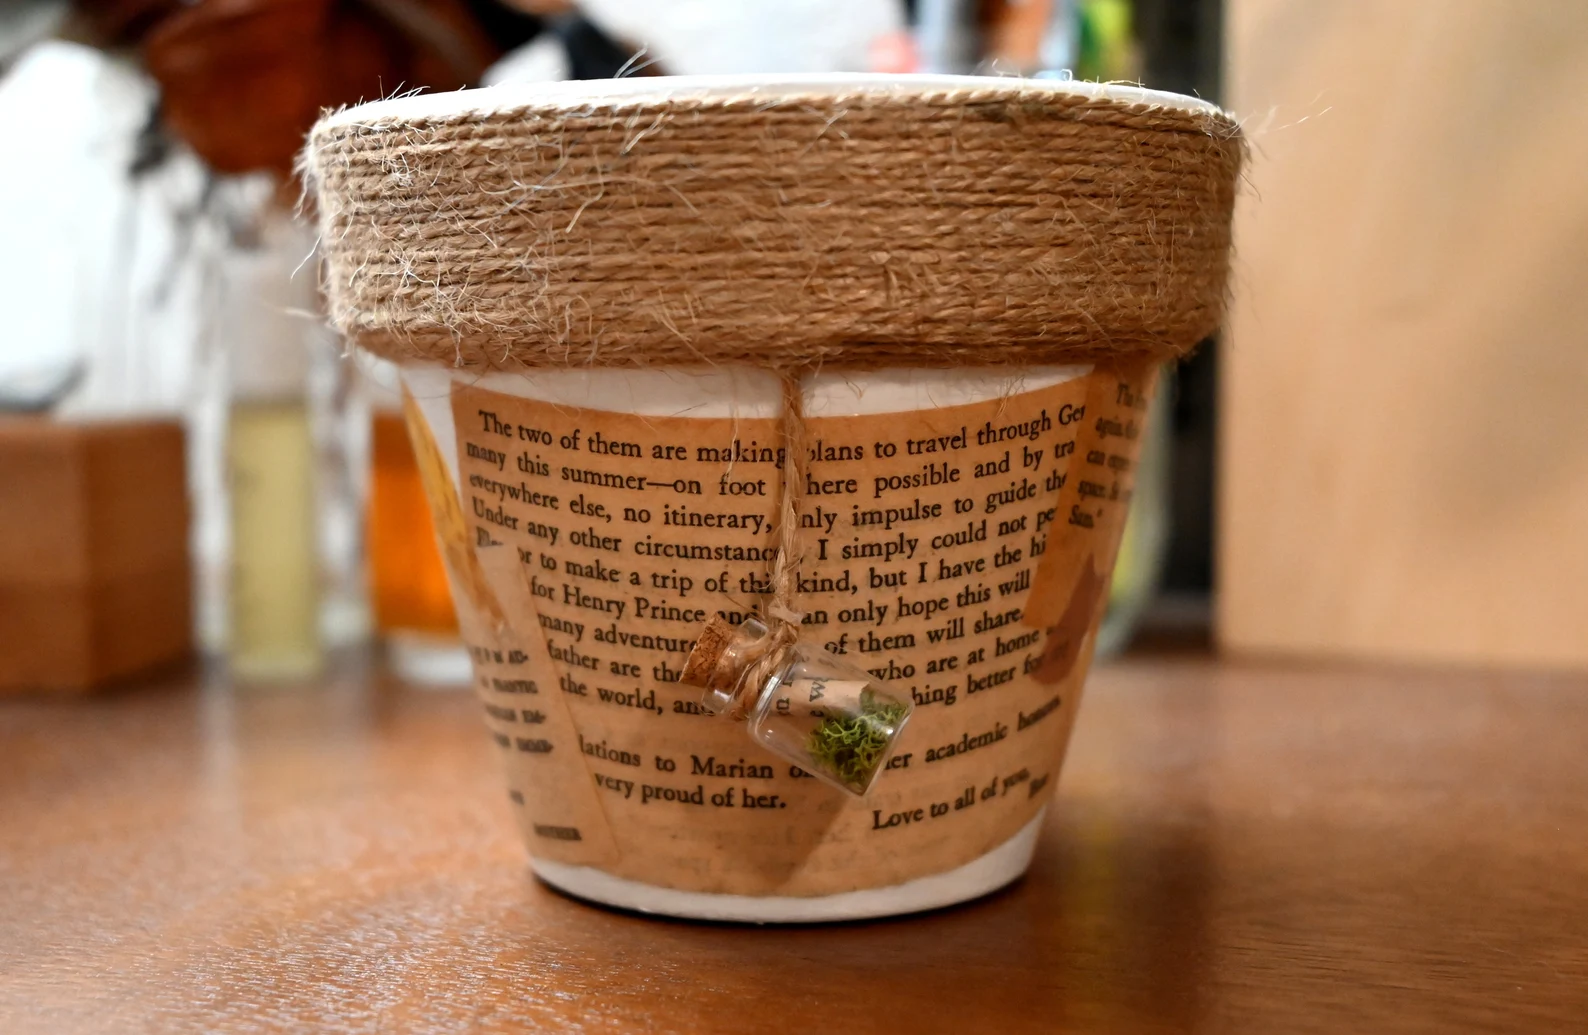 A small pot decorated with pages of text from an old book, and a border of twine wrapped around the top edge.